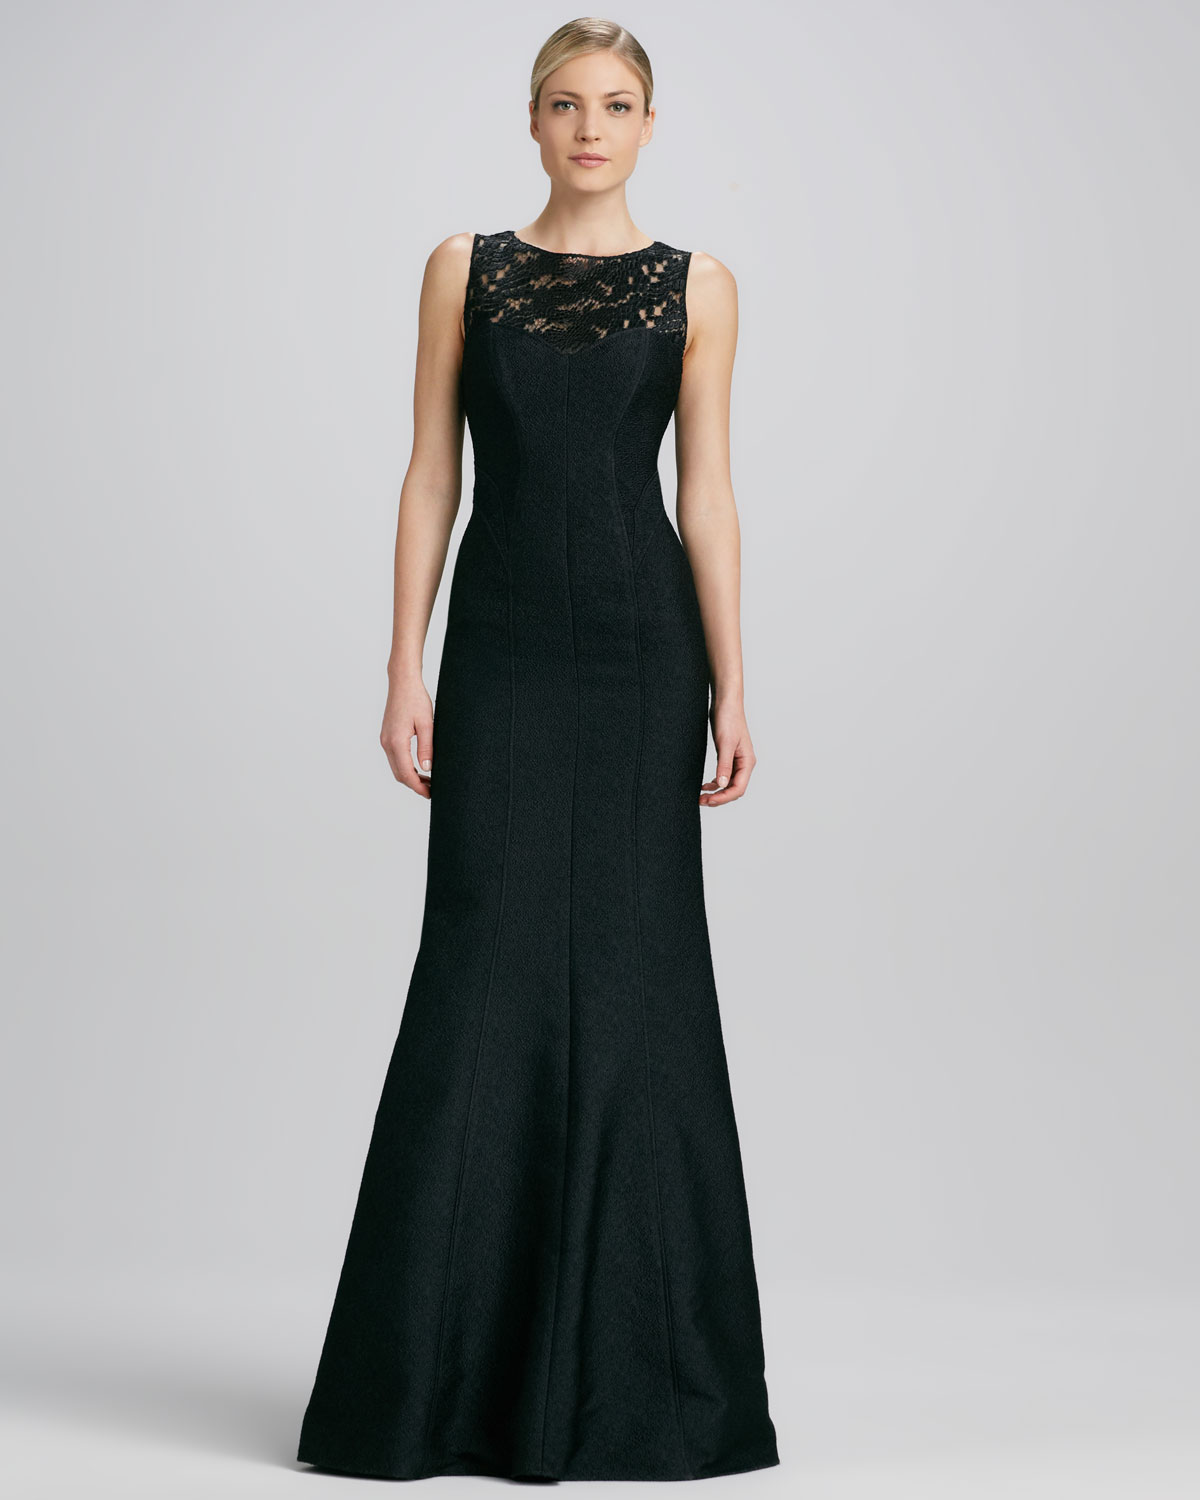 David meister Sleeveless Lace Illusionneck Gown in Black | Lyst